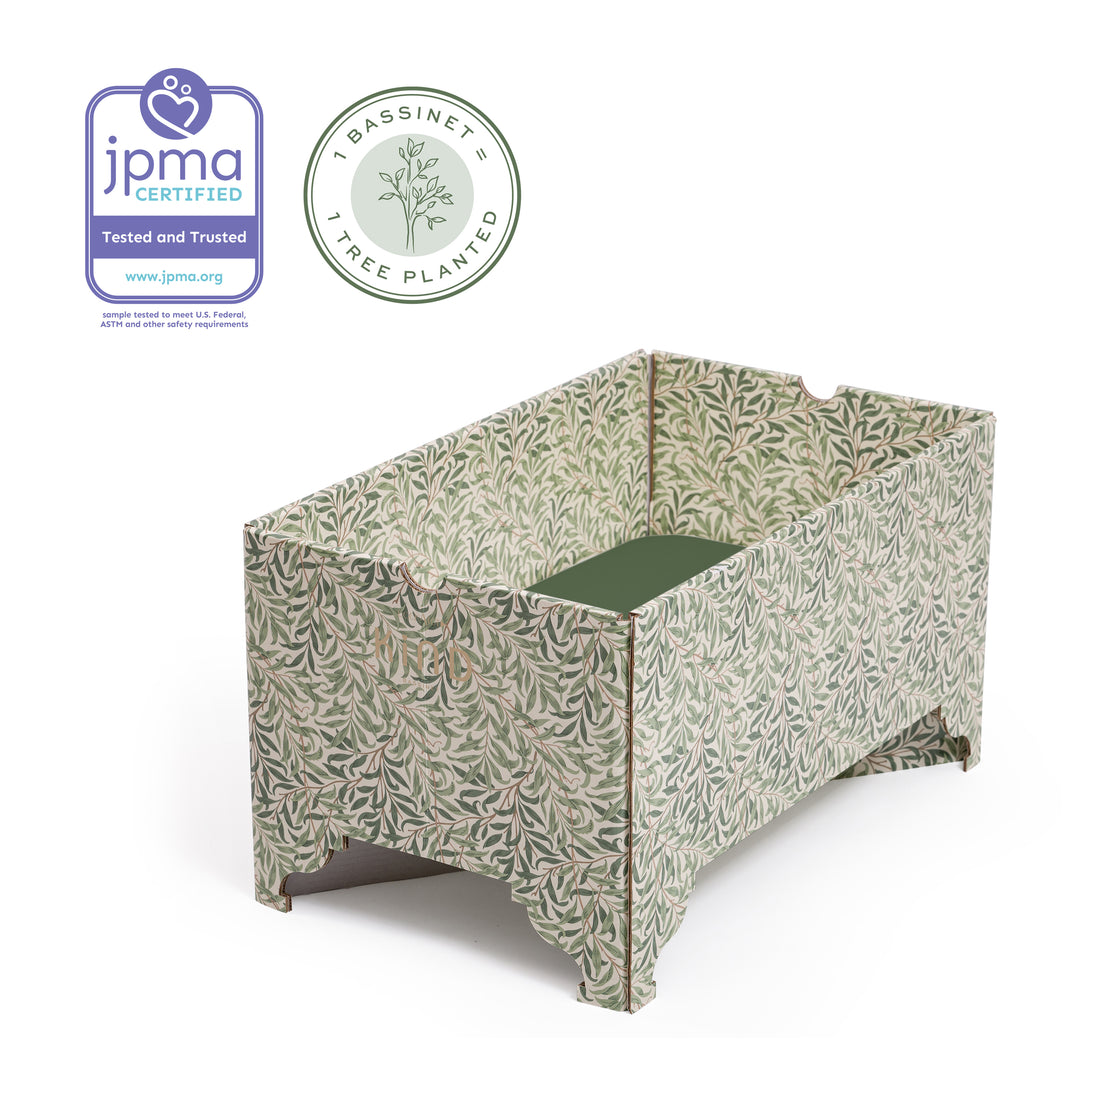 An image of a DockATot Kind Essential Bassinet - Willow Boughs, jpma certified, tree planted bassinet with a botanical print. The bassinet features ornately crafted pedestal feet and is designed for infant safety and comfort.